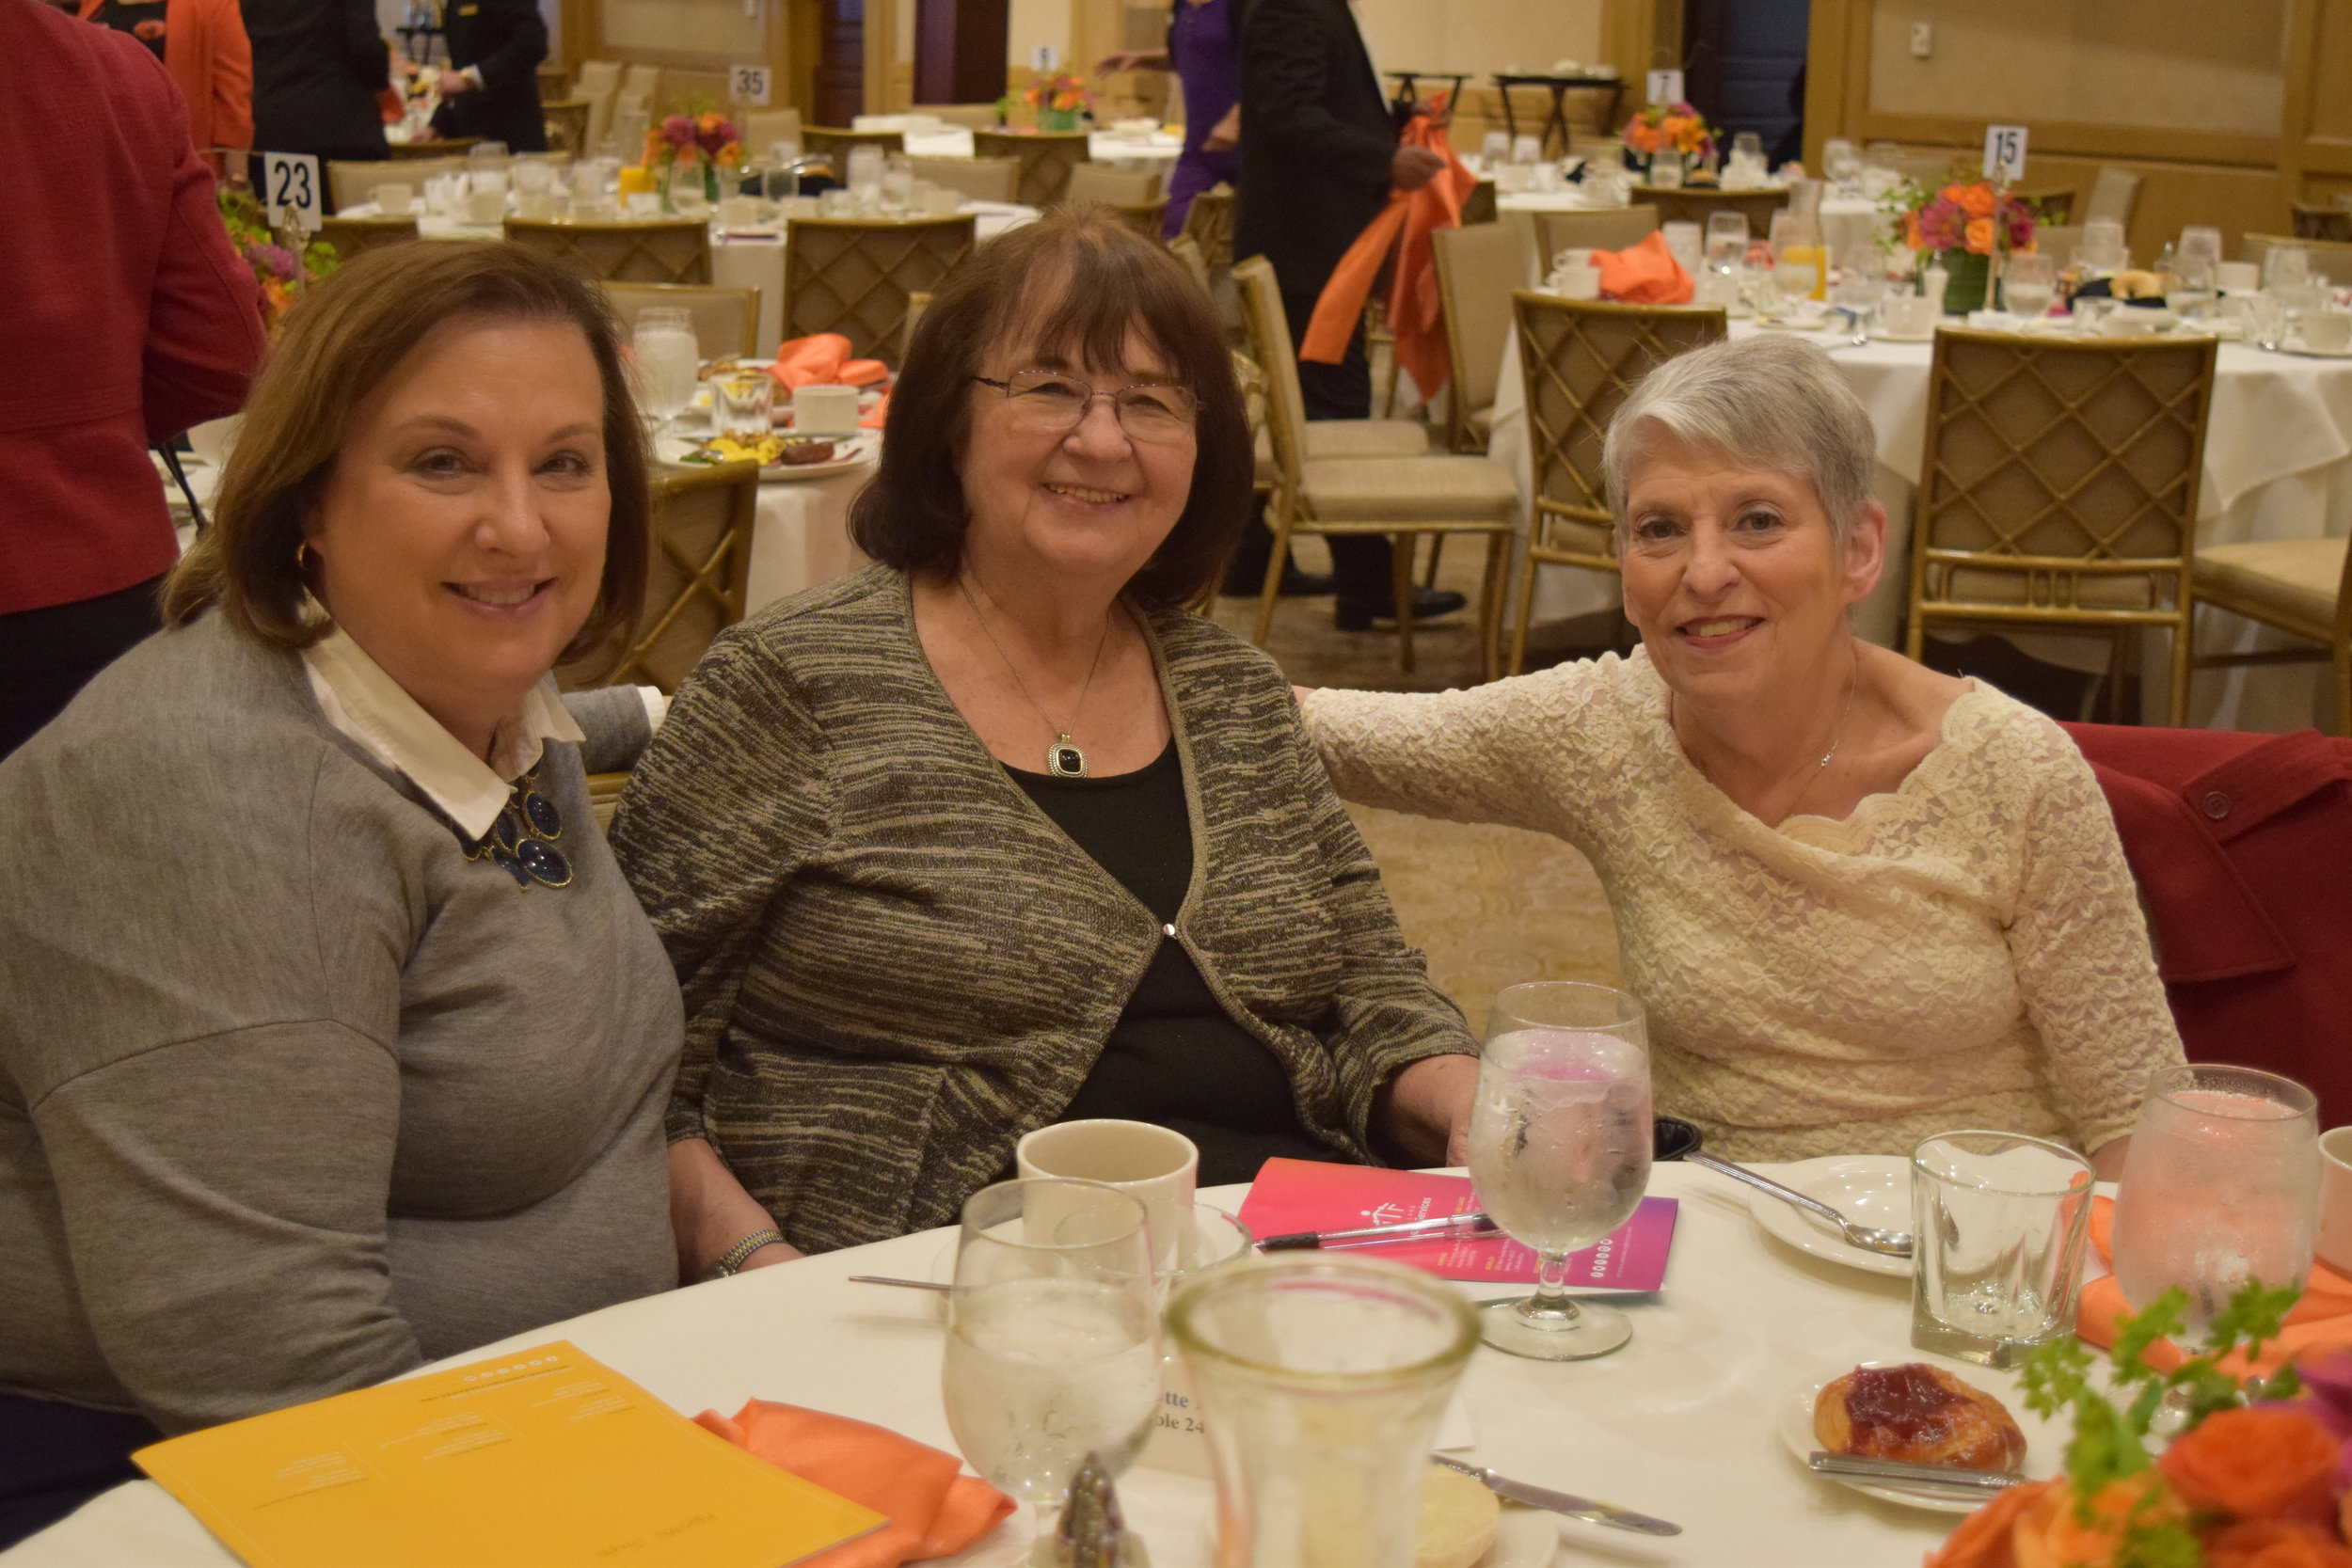 Attending the breakfast were Charlotte Paul, Catherine Marchione and Beverly Landau.